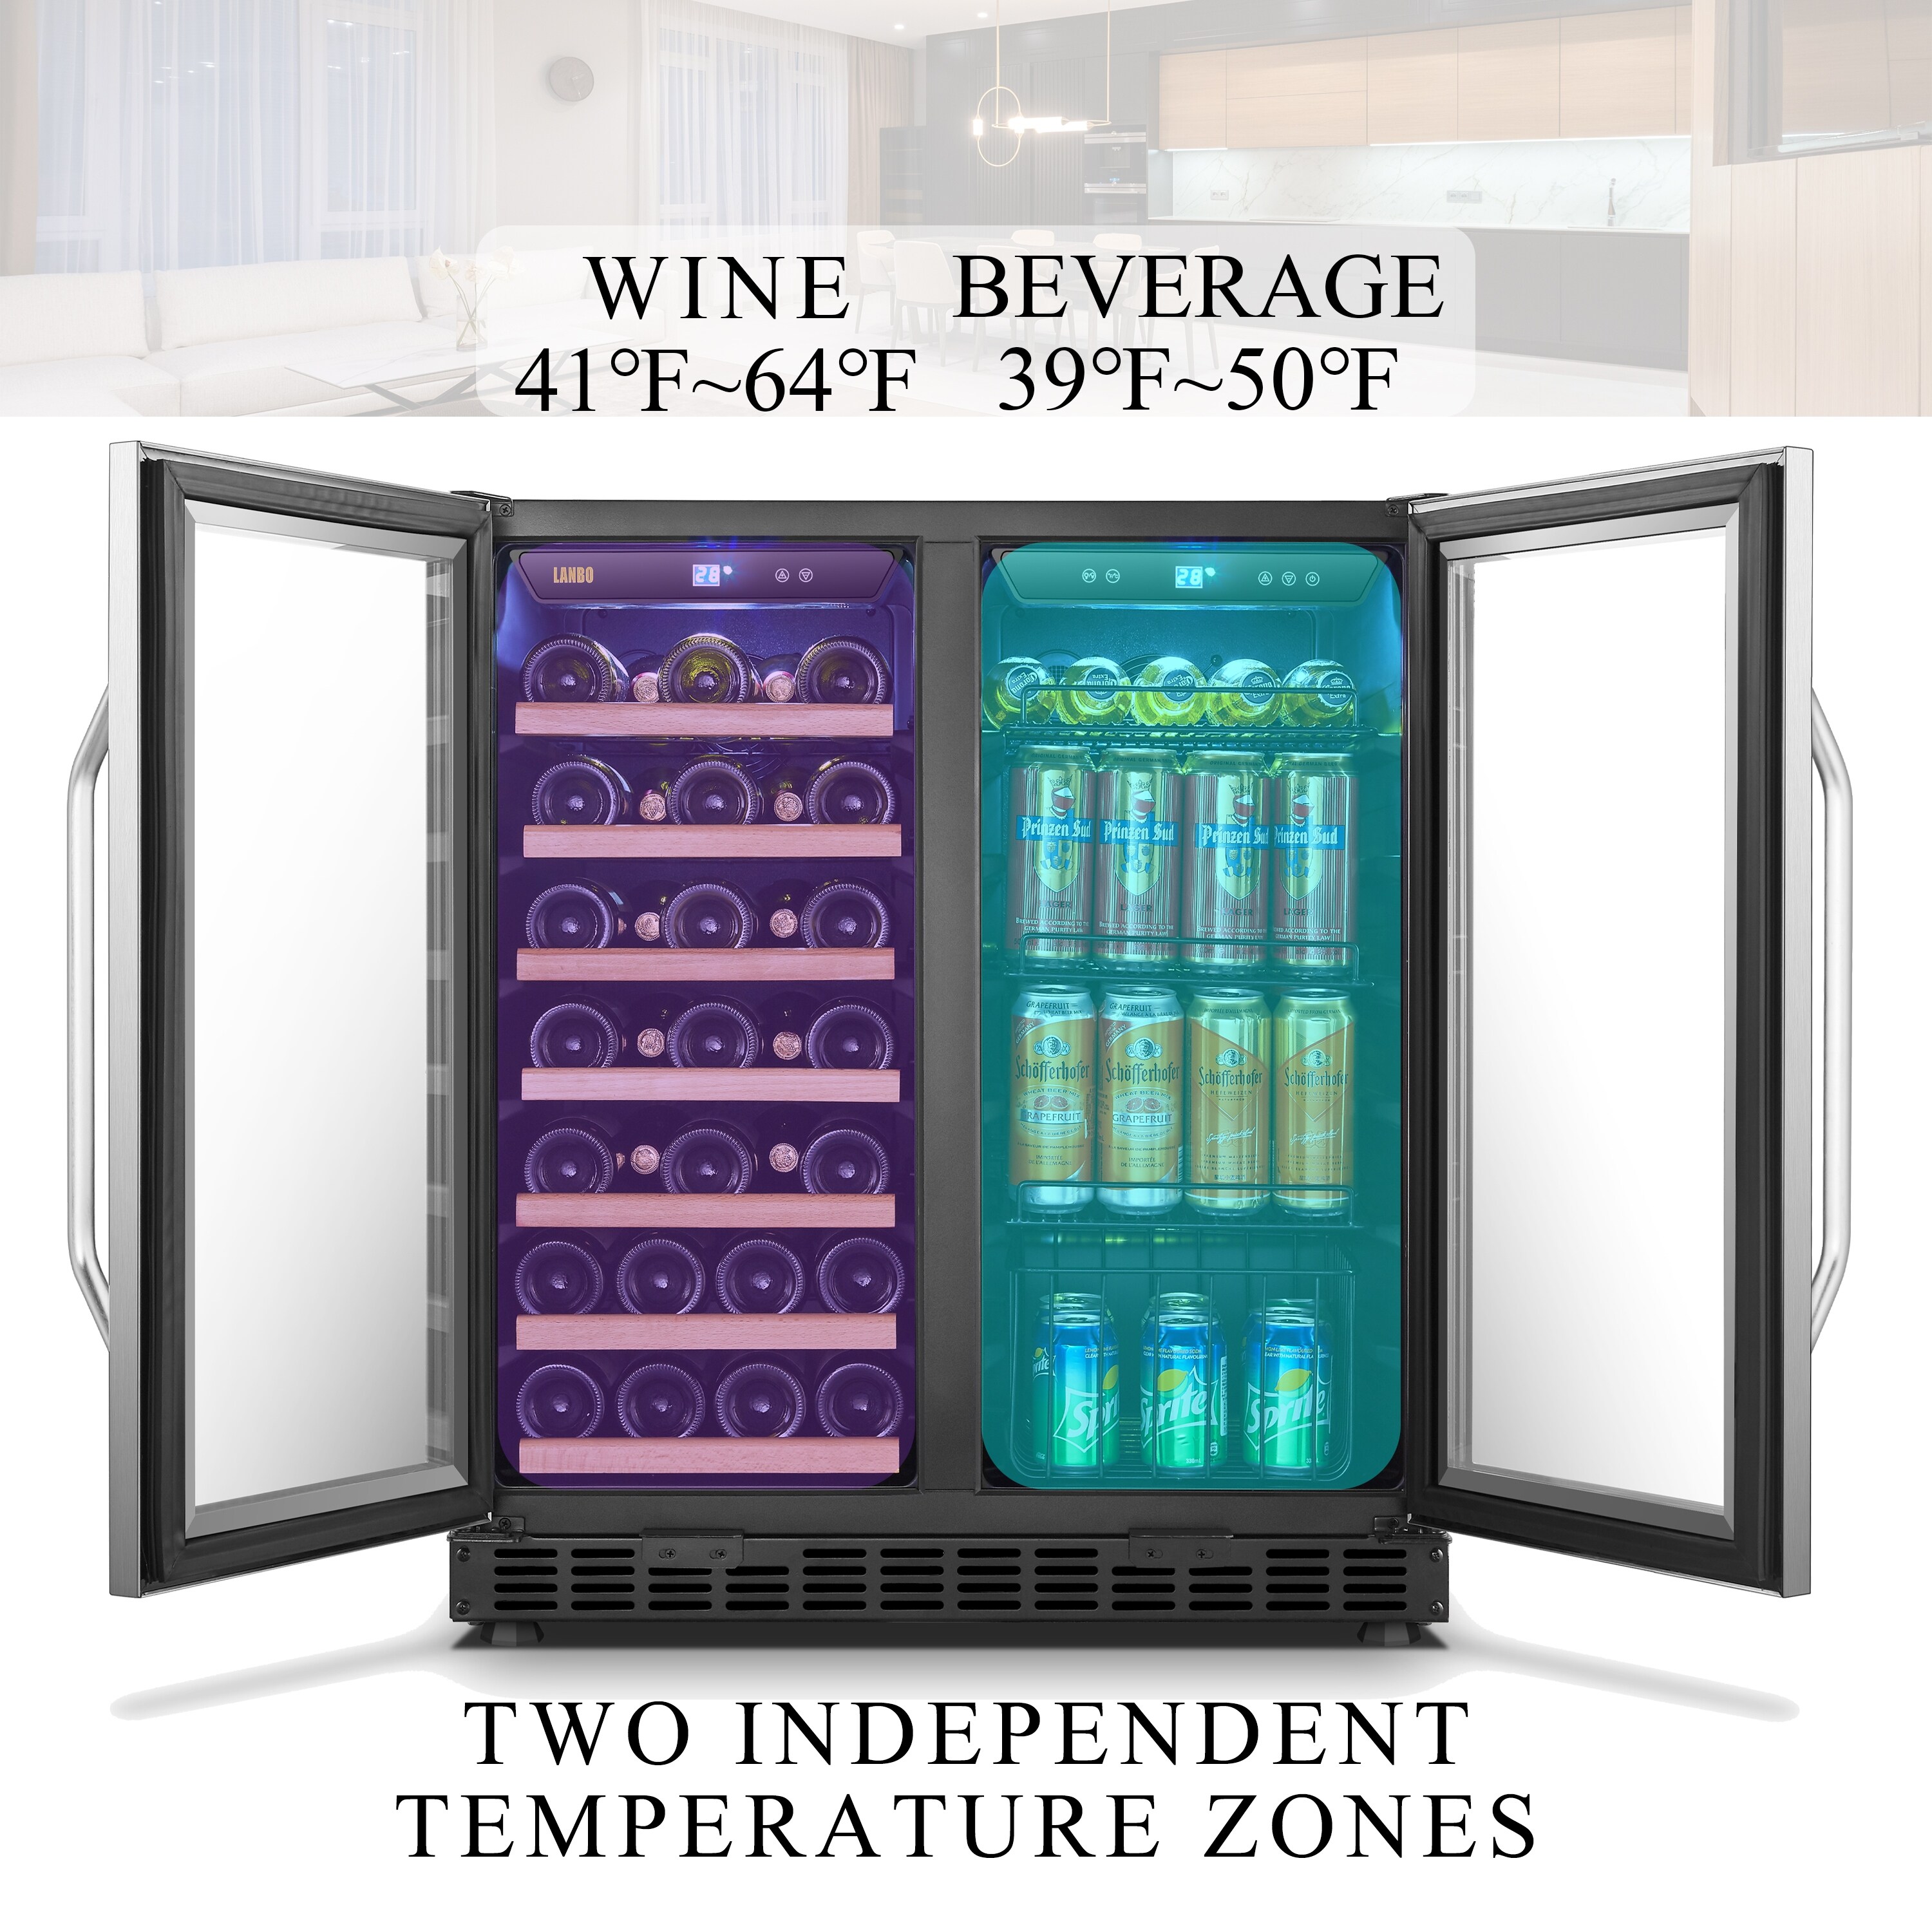 https://ak1.ostkcdn.com/images/products/is/images/direct/4d81e68c4d485473e2089acac721f20c33a00fd2/Lanbo-Wine-and-Beverage-Cooler%2C-30-Inch-Compressor-Under-Counter-Wine-and-Beverage-Fridge%2C-33-Bottle-and-70-Can.jpg